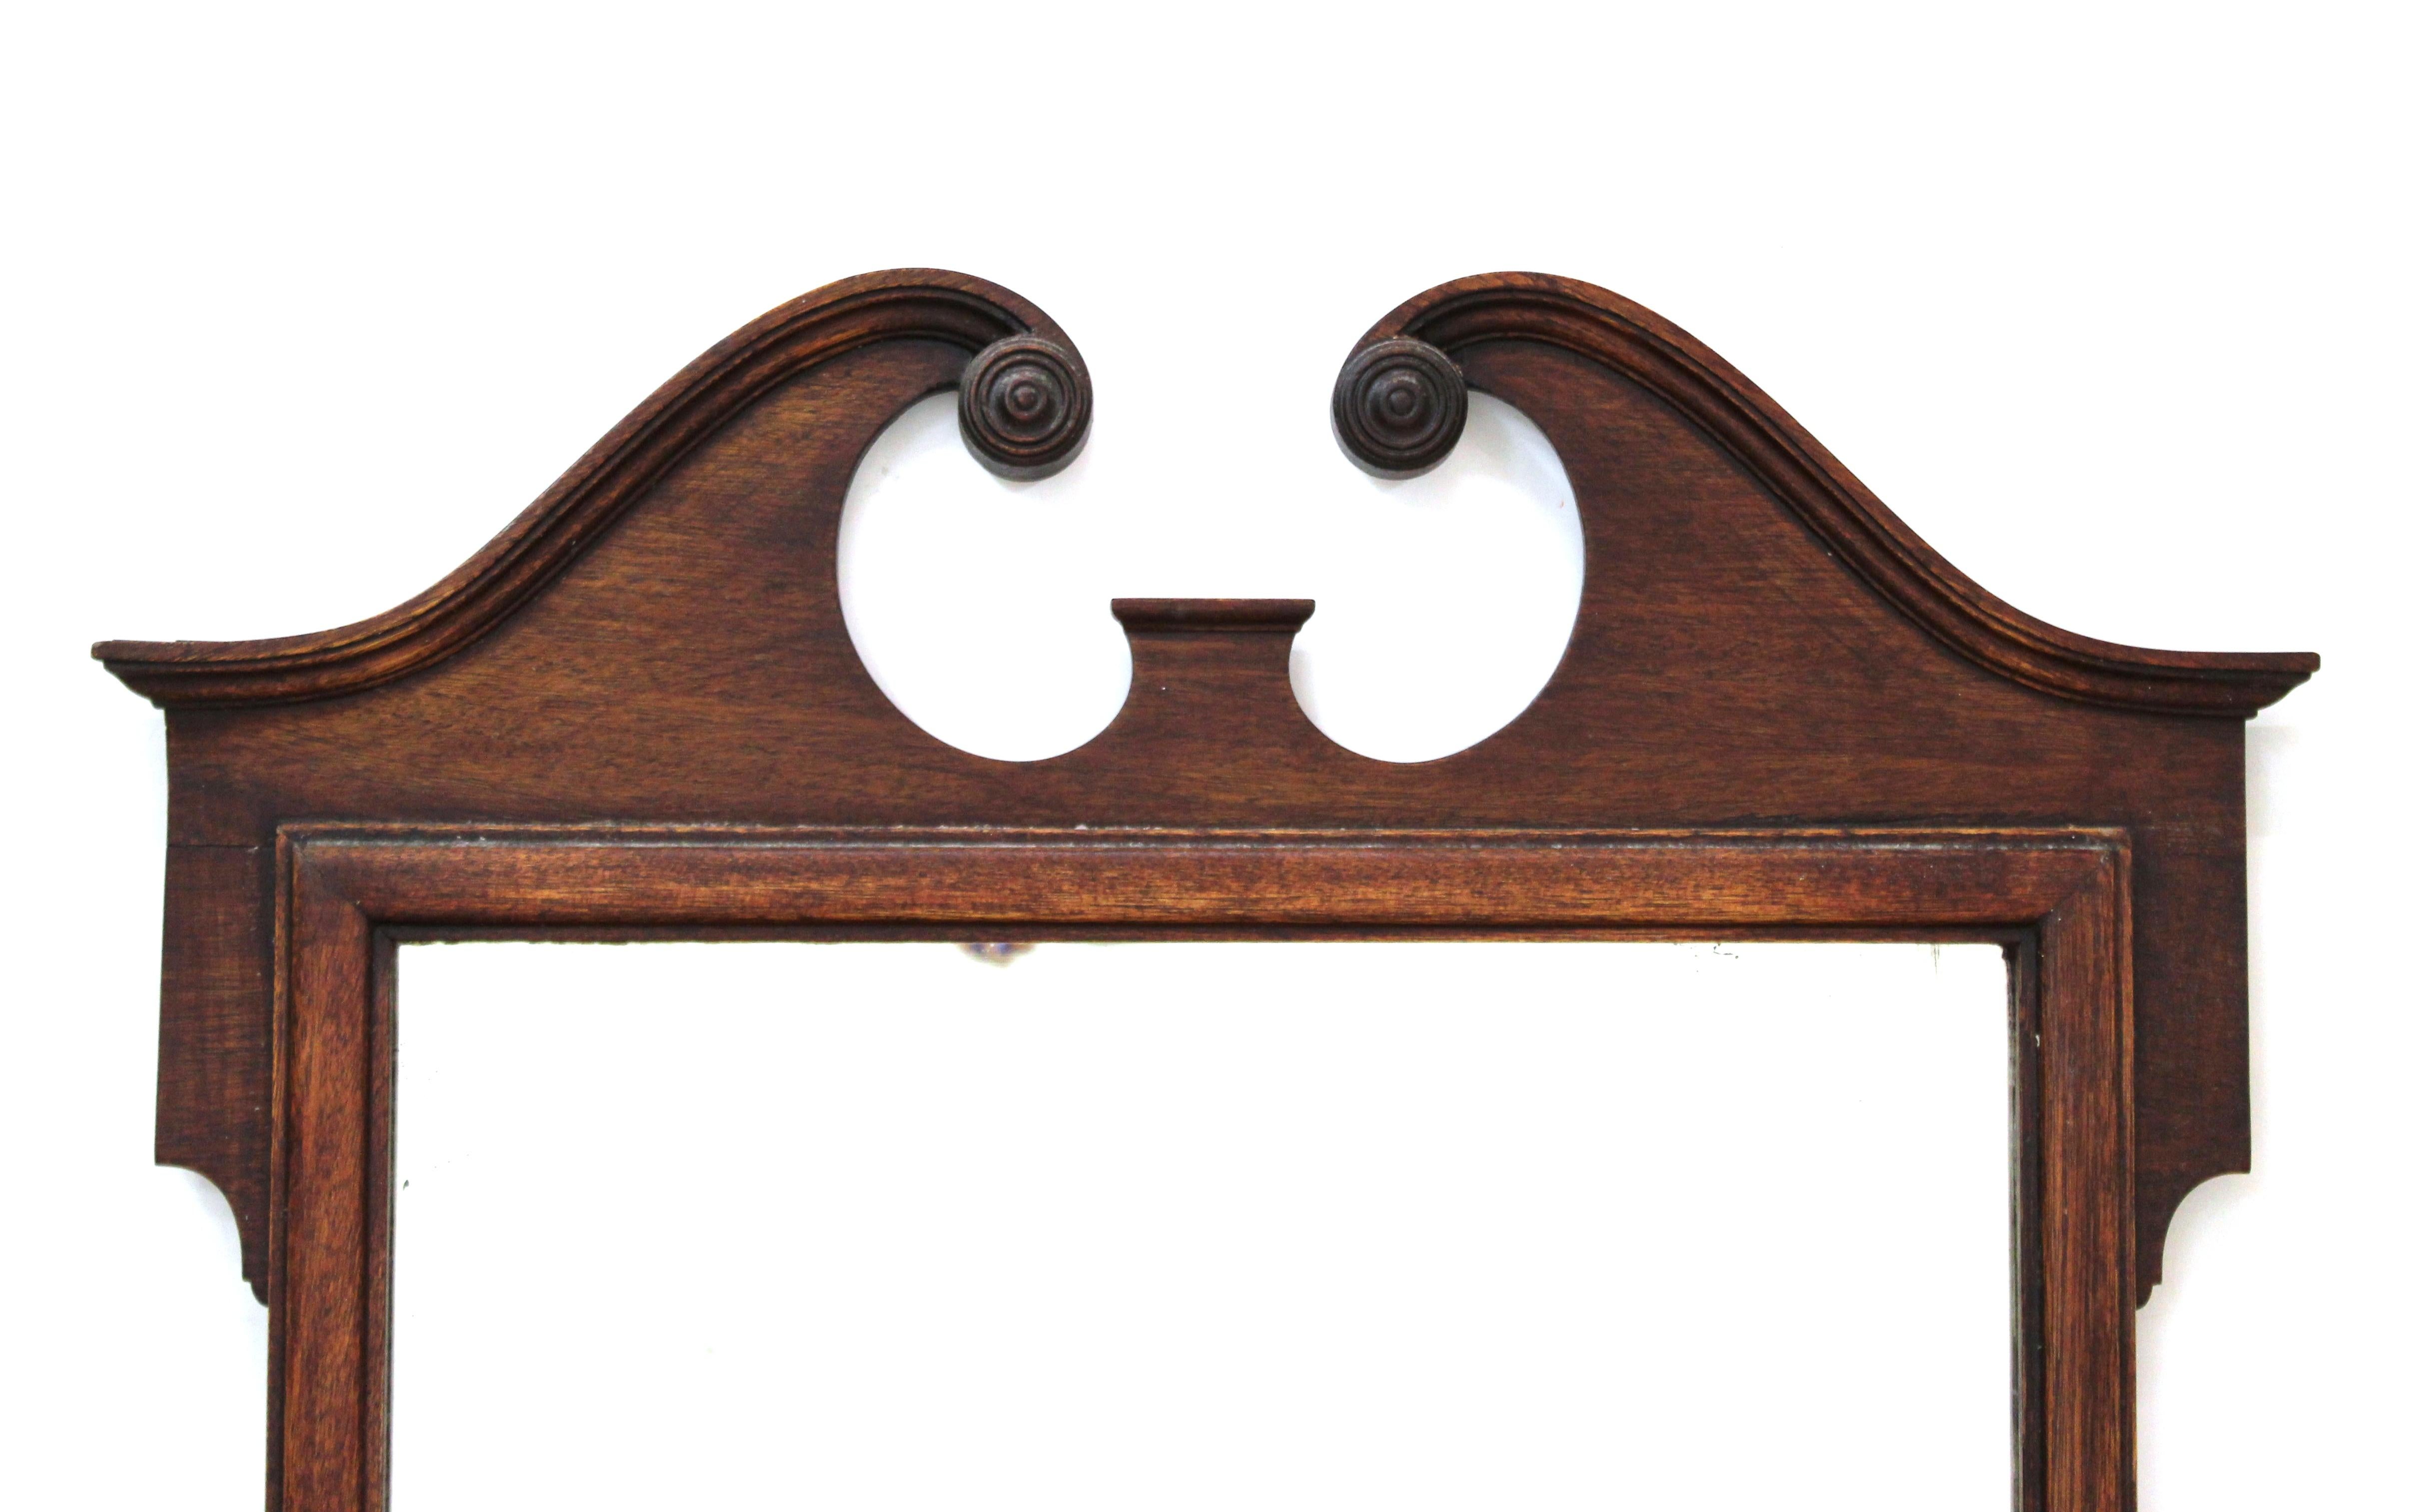 Queen Anne style wall mirror with carved wood frame and broken pediment. Made in the 19th century, the piece is in great antique condition with age-appropriate wear and use.